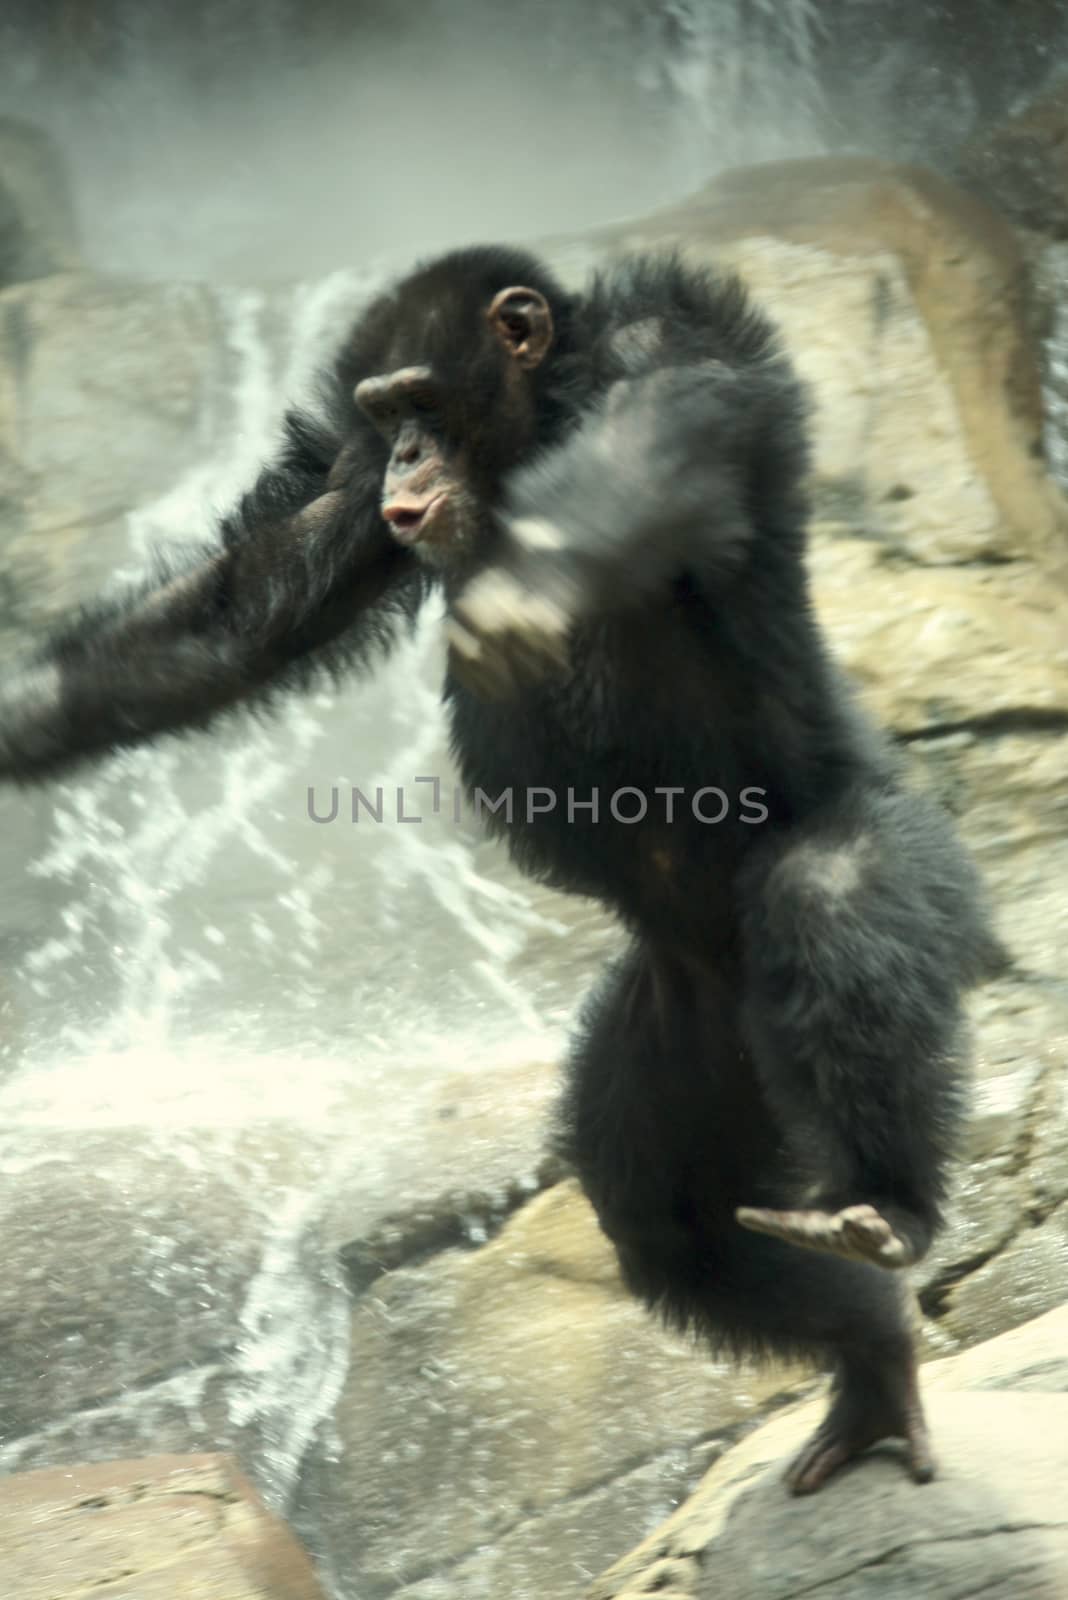 Wildly Jumping Chimp WIth Intentional Motion Blur